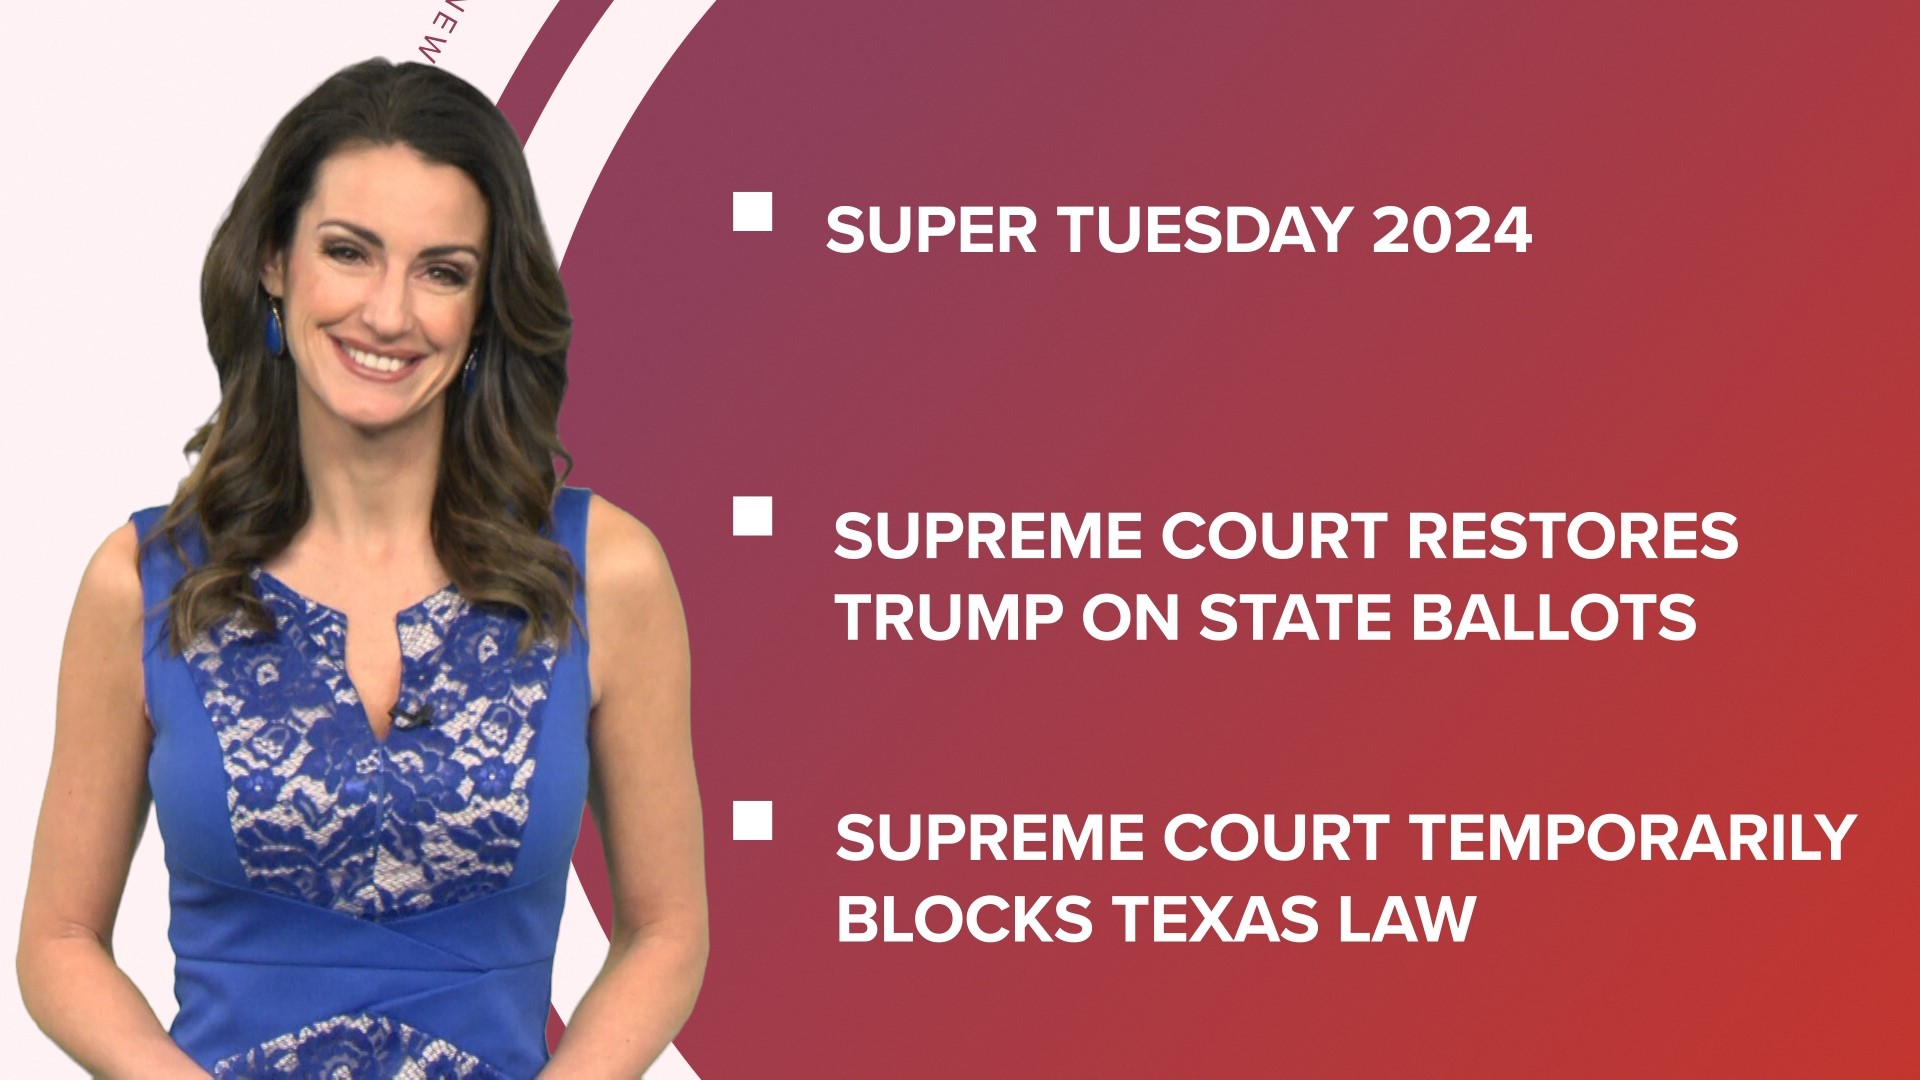 A look at what is happening in the news from Super Tuesday voting underway to the Supreme Court ruling Trump can stay on state ballots and more.